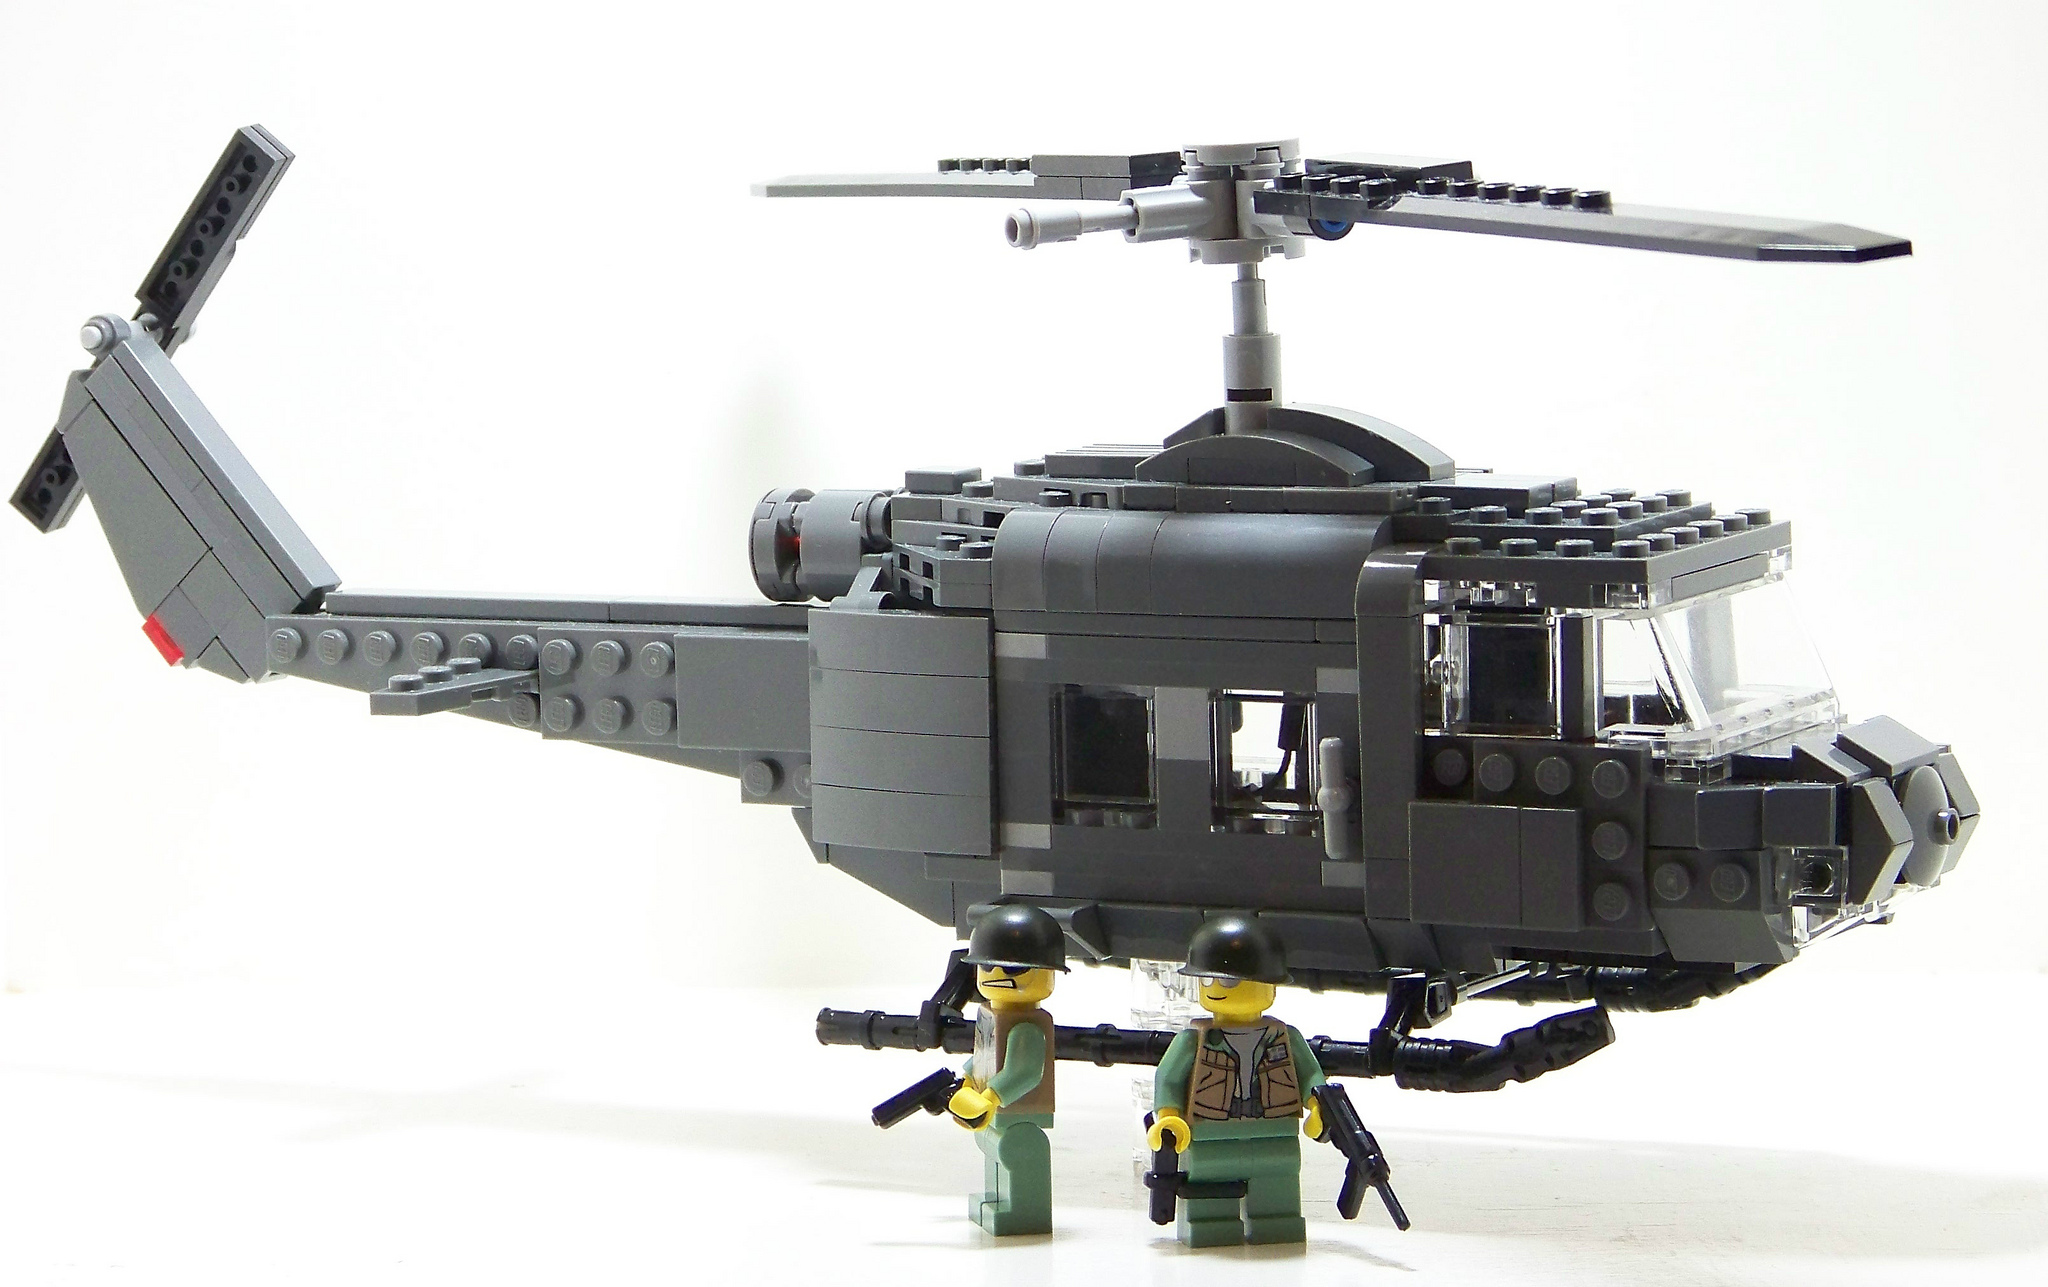 Lego-helicoptere-us-guerre-vietnam-UH-1B-HUEY